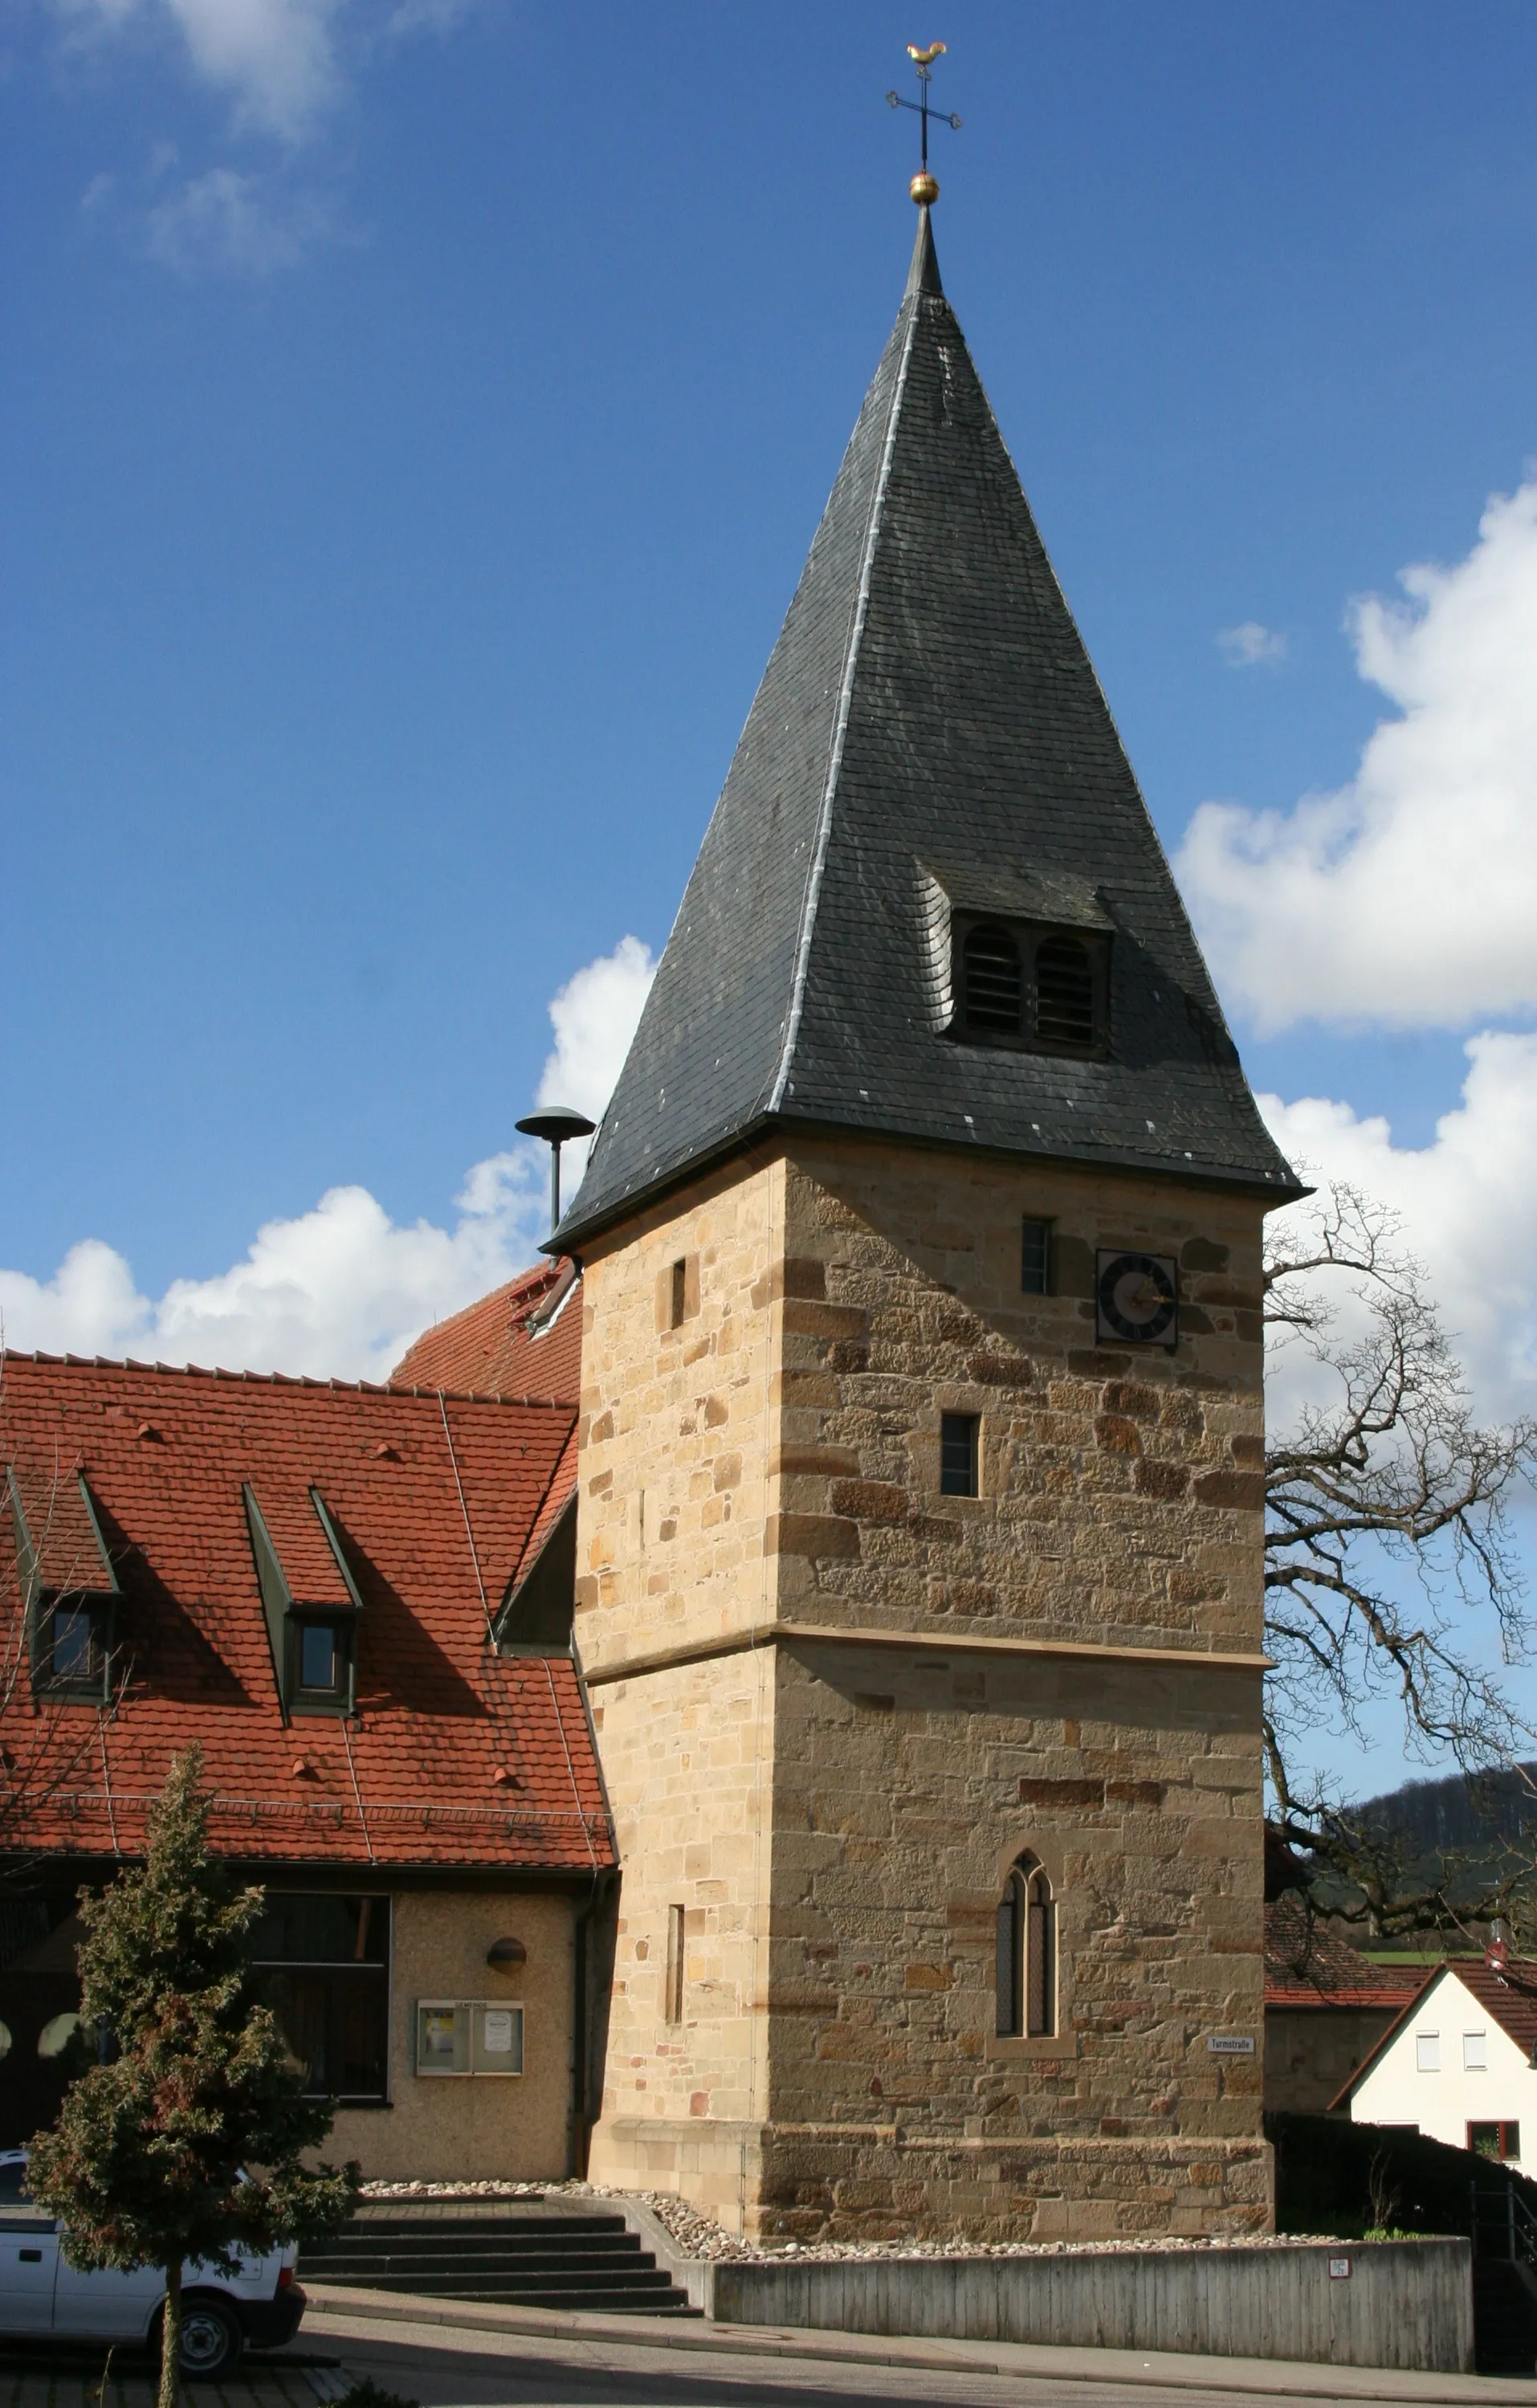 Photo showing: The tower of the St John's church in Eberstadt-Hölzern